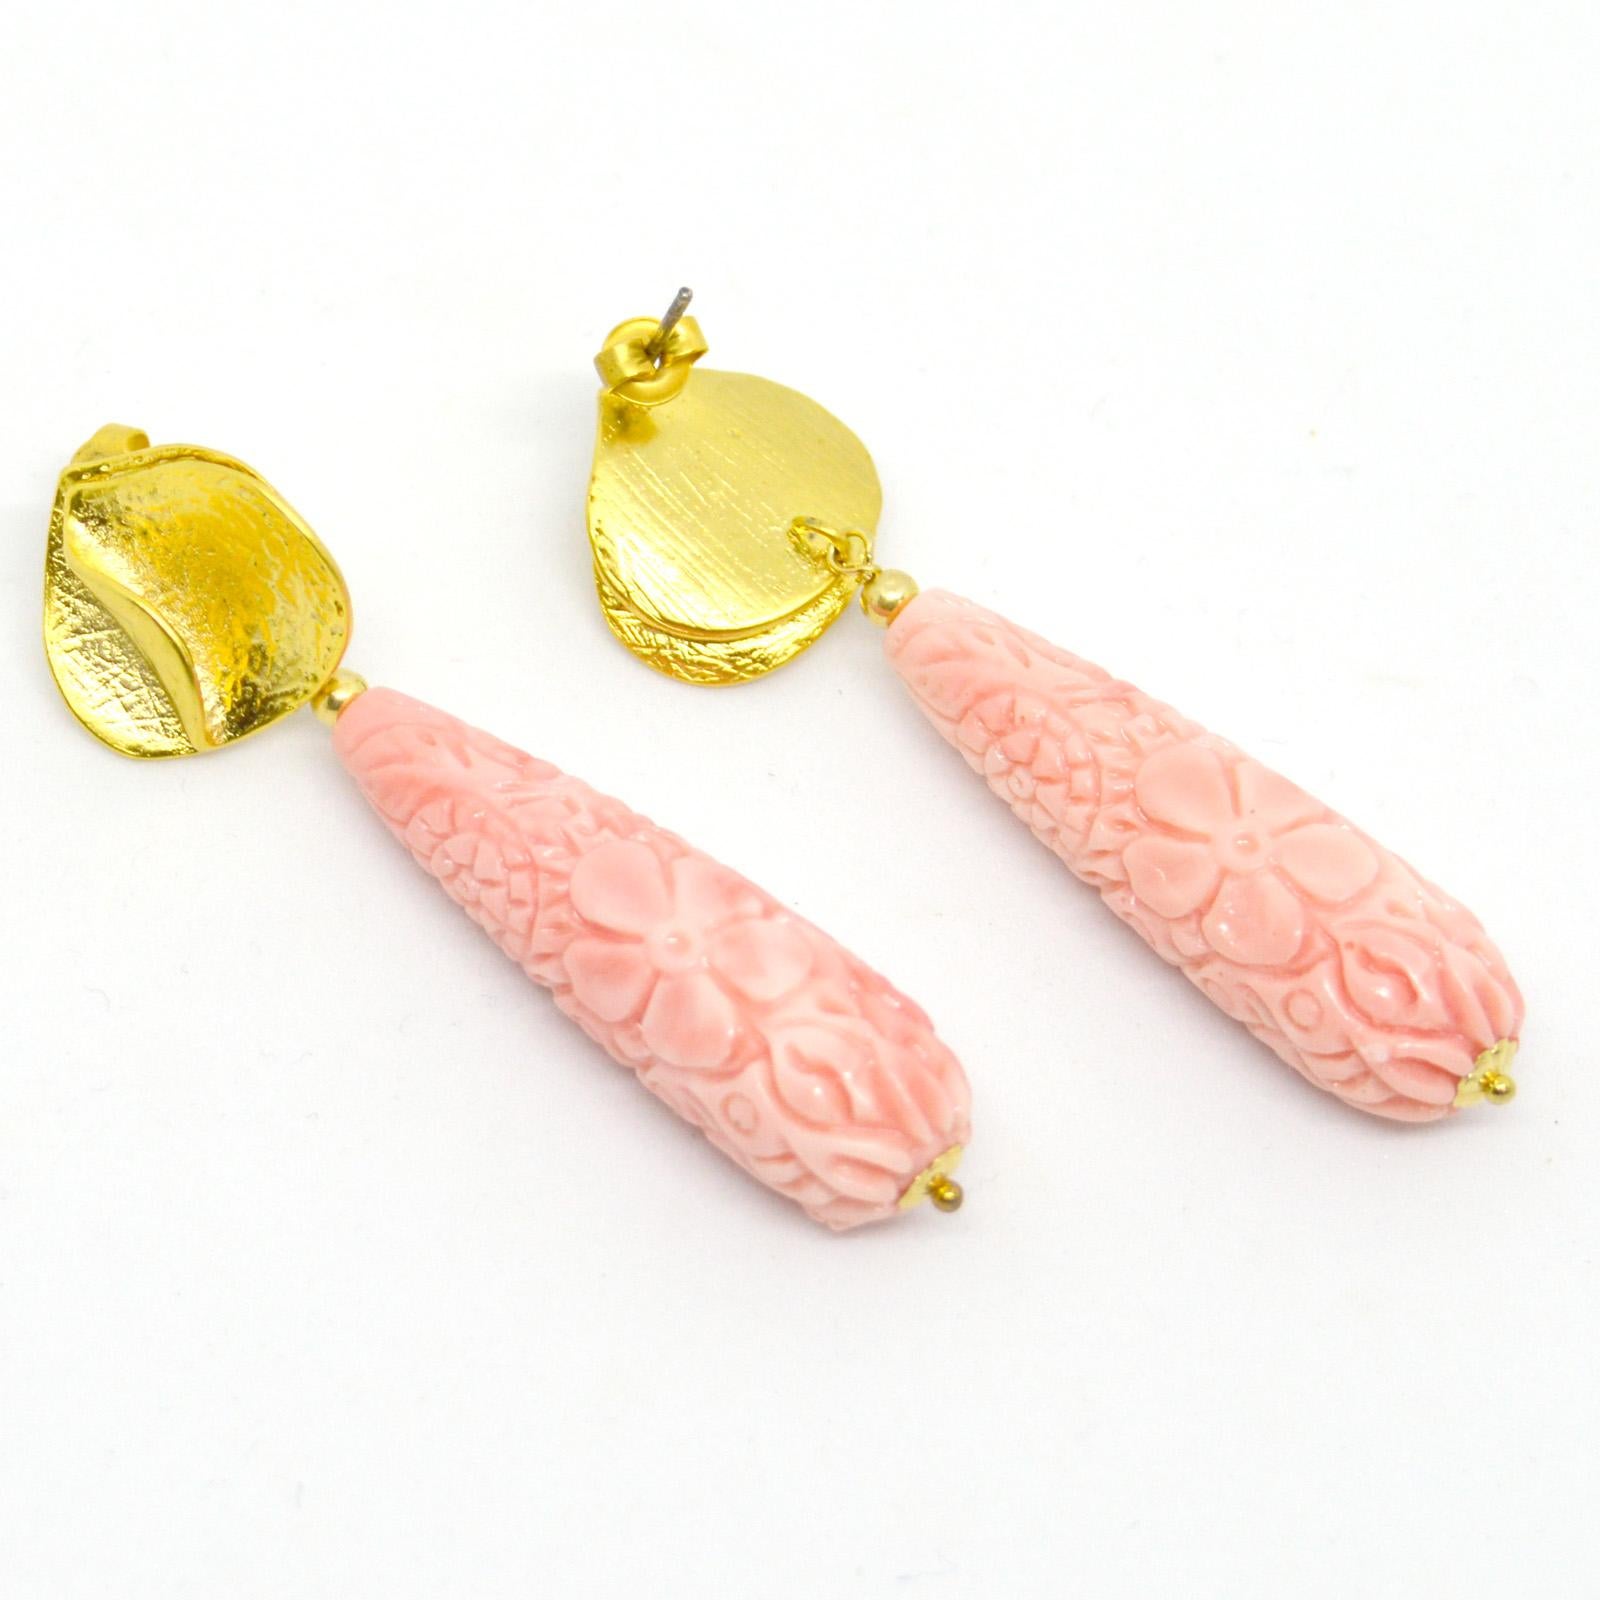 10x30mm Carved Shell reconstituted Teardrop with a 16.5mm Gold plate Lotus Stud Sterling silver Post. 14k Gold Filled headpin 4mm cap and 3mm round beads.

Total Earring length from post 55mm  2.16 inches